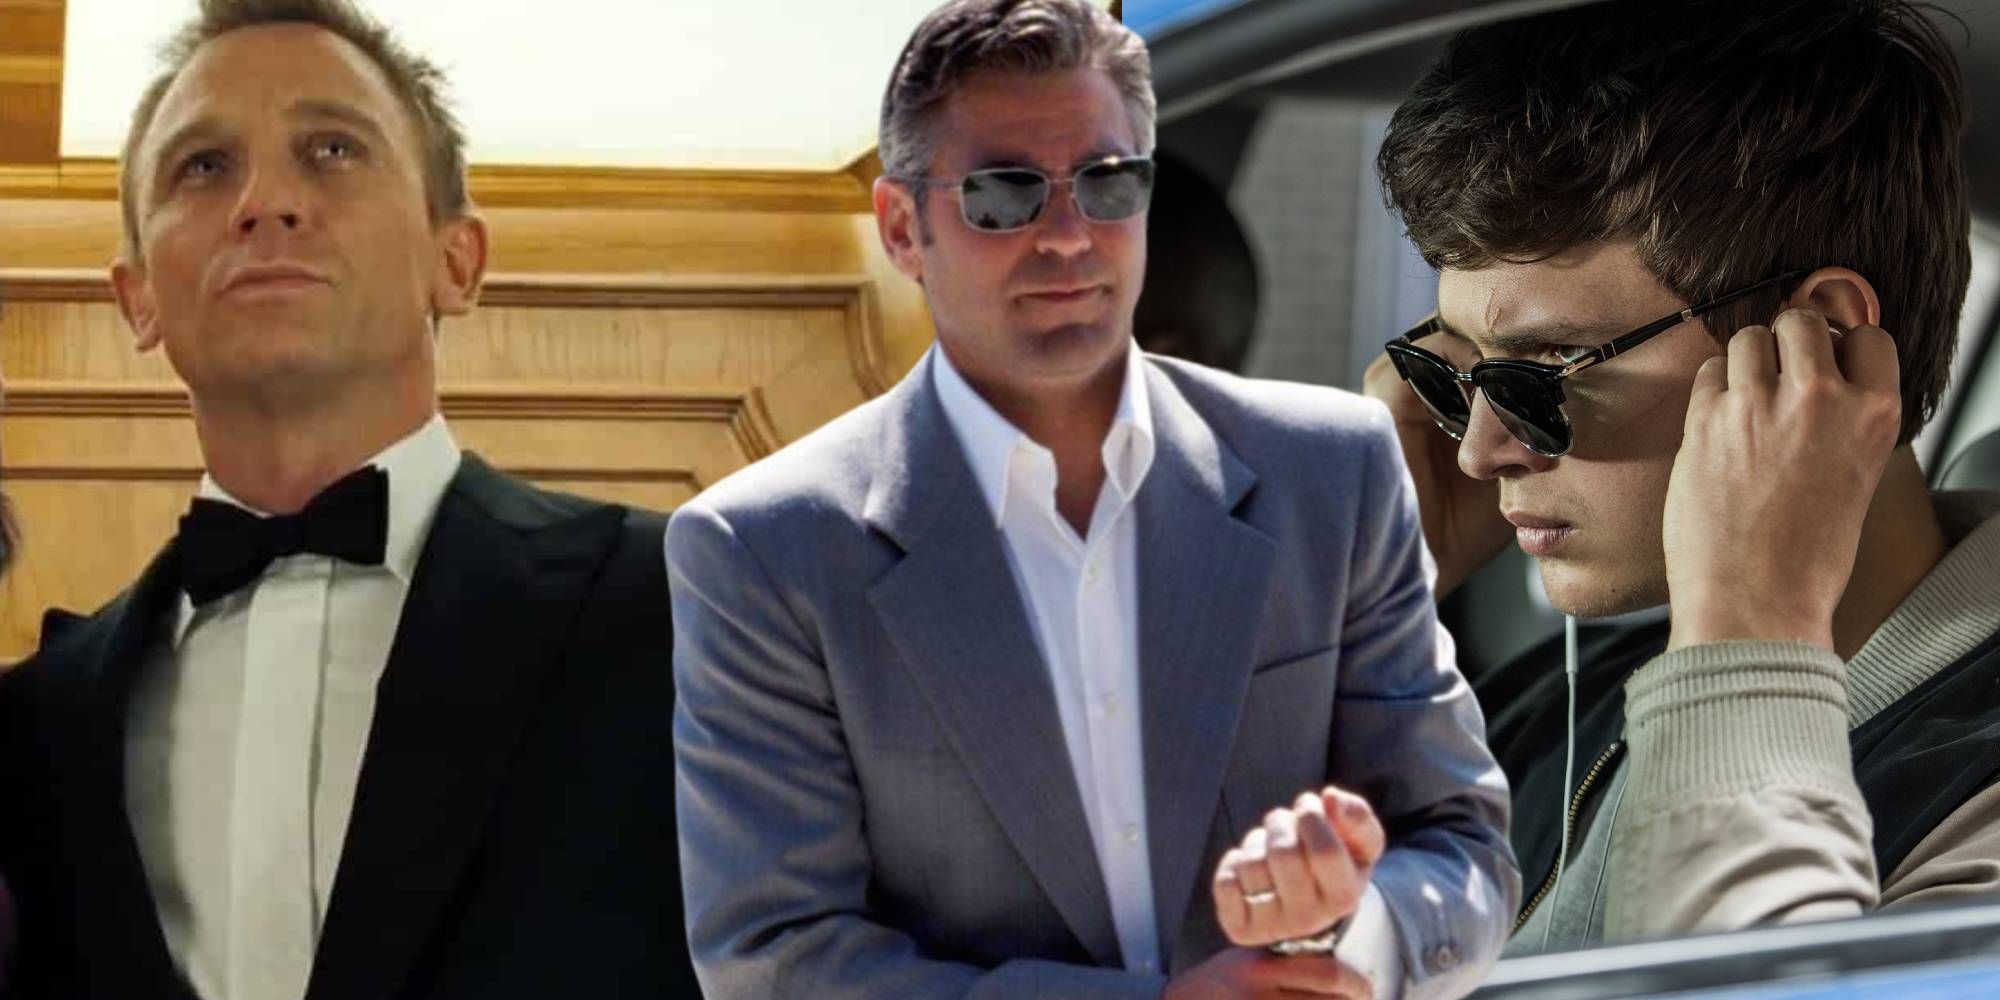 Stills from Casino Royale, Ocean's Eleven and Baby Driver